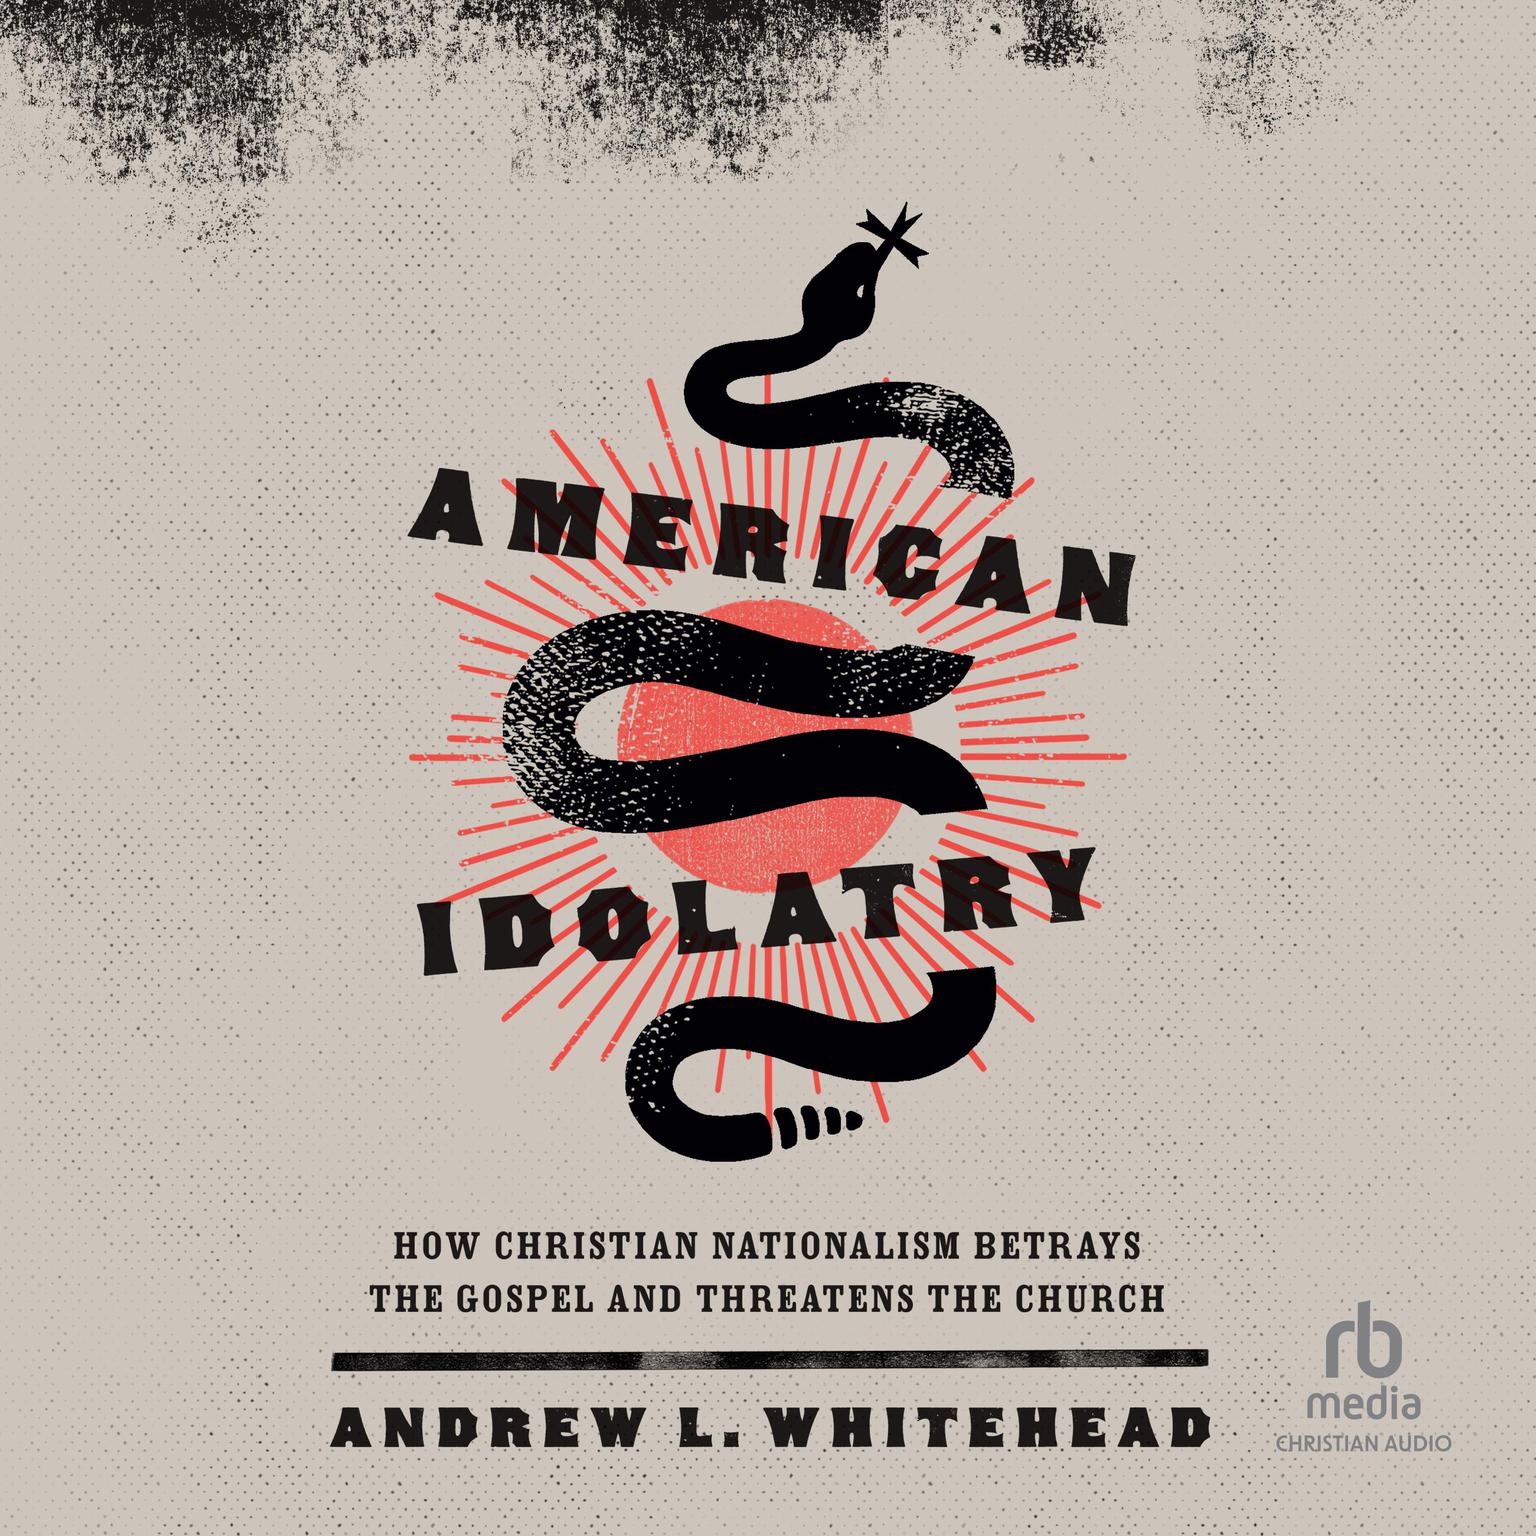 American Idolatry: How Christian Nationalism Betrays the Gospel and Threatens the Church Audiobook, by Andrew L. Whitehead